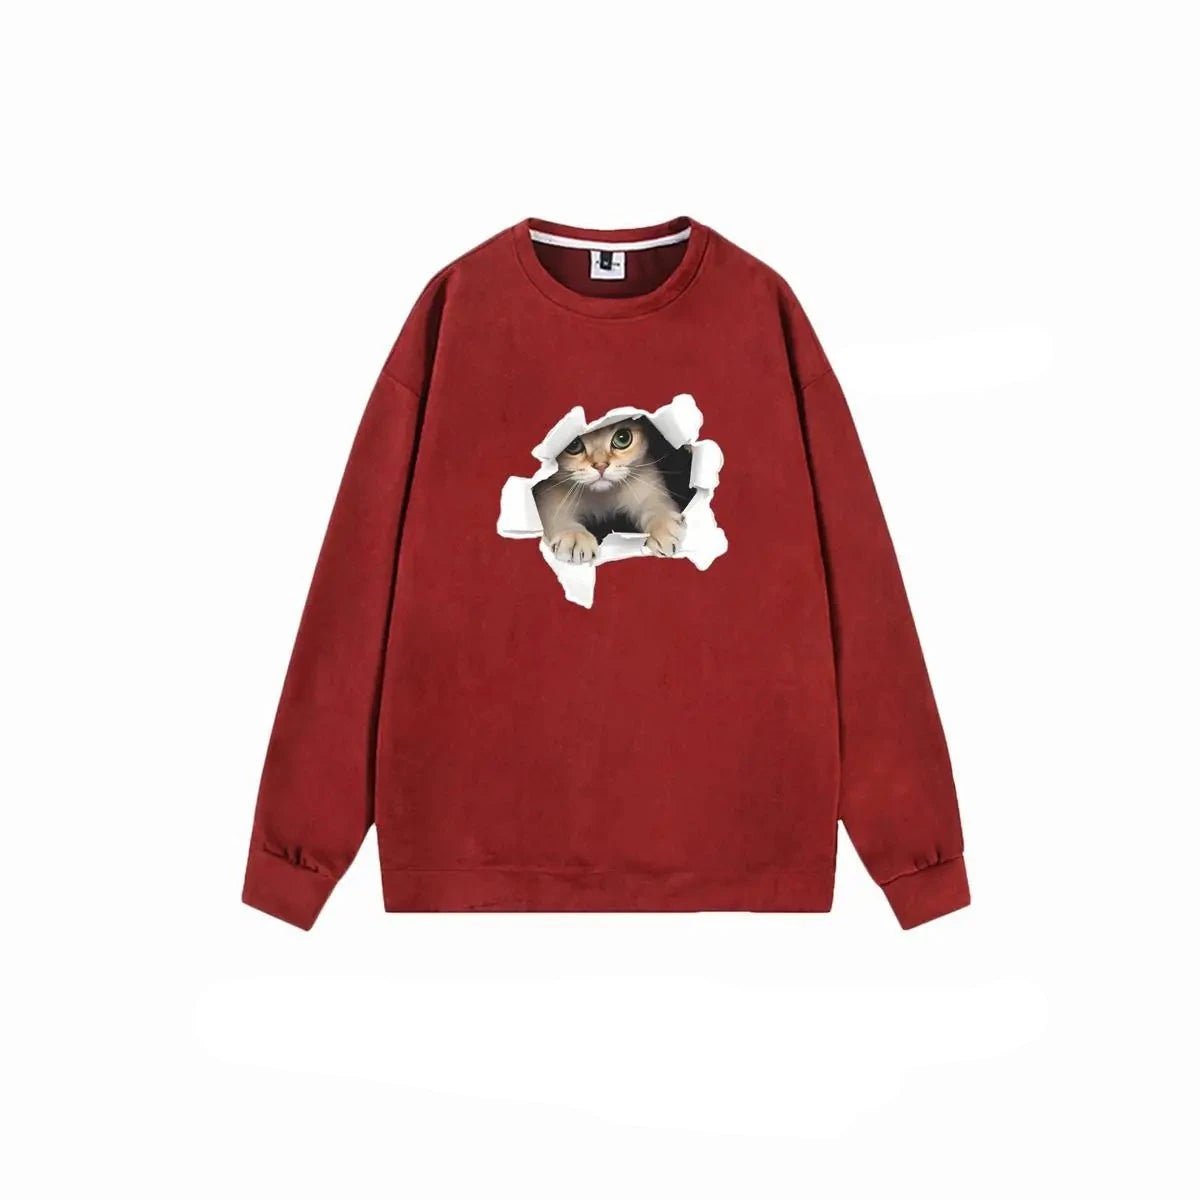 Adorable Cat Face Sweatshirt in Luxurious Suede Fabric